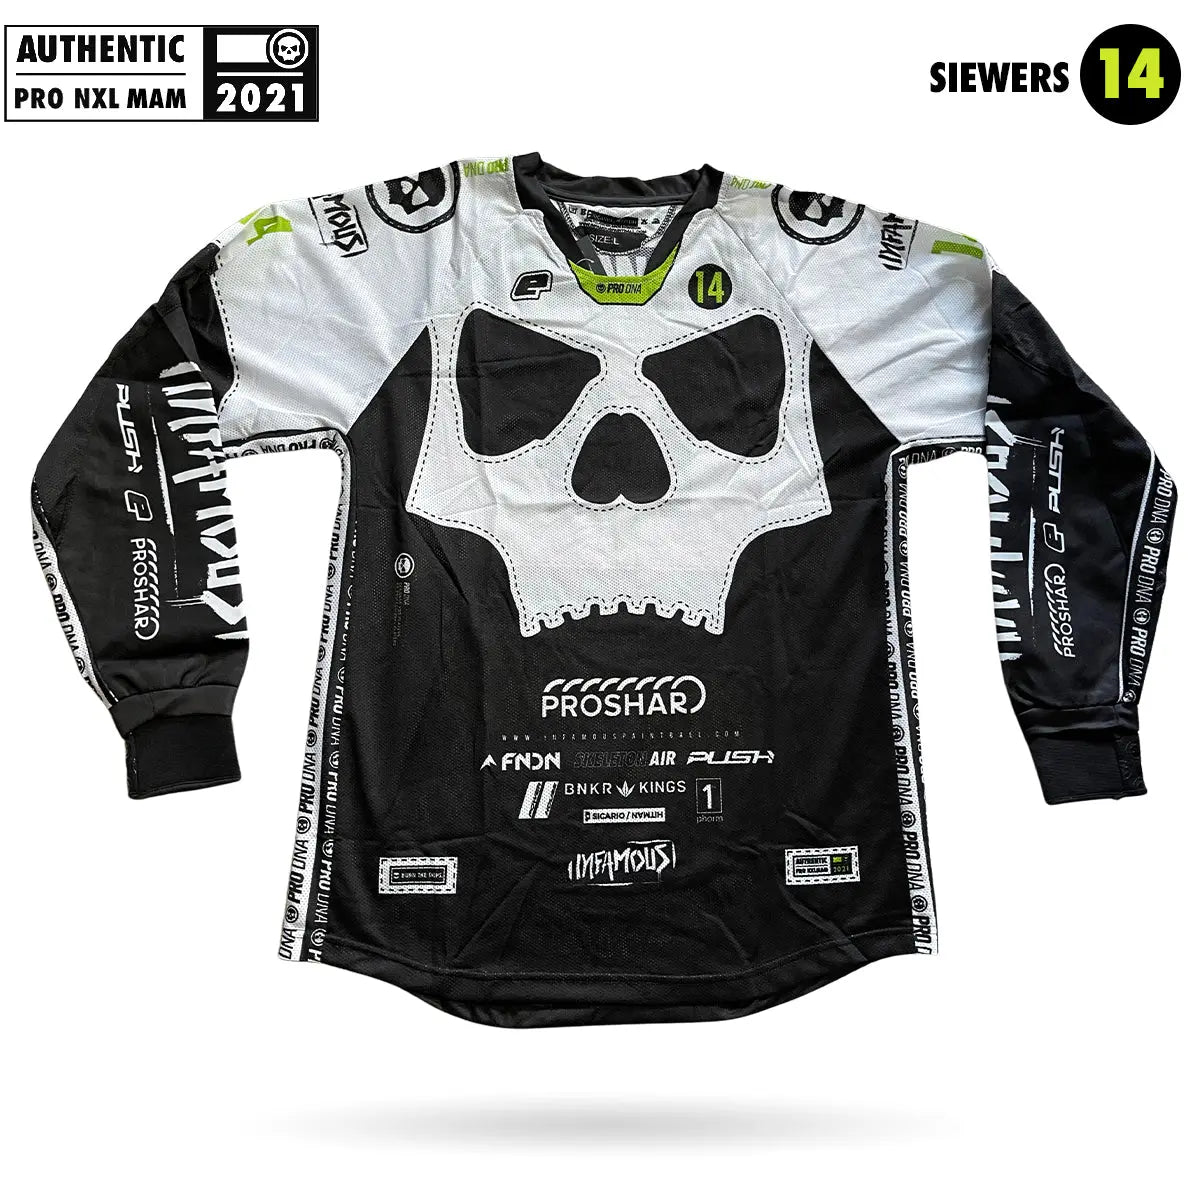 INFAMOUS AWAY JERSEY - NXL MAM 2021 - SIEWERS Infamous Paintball